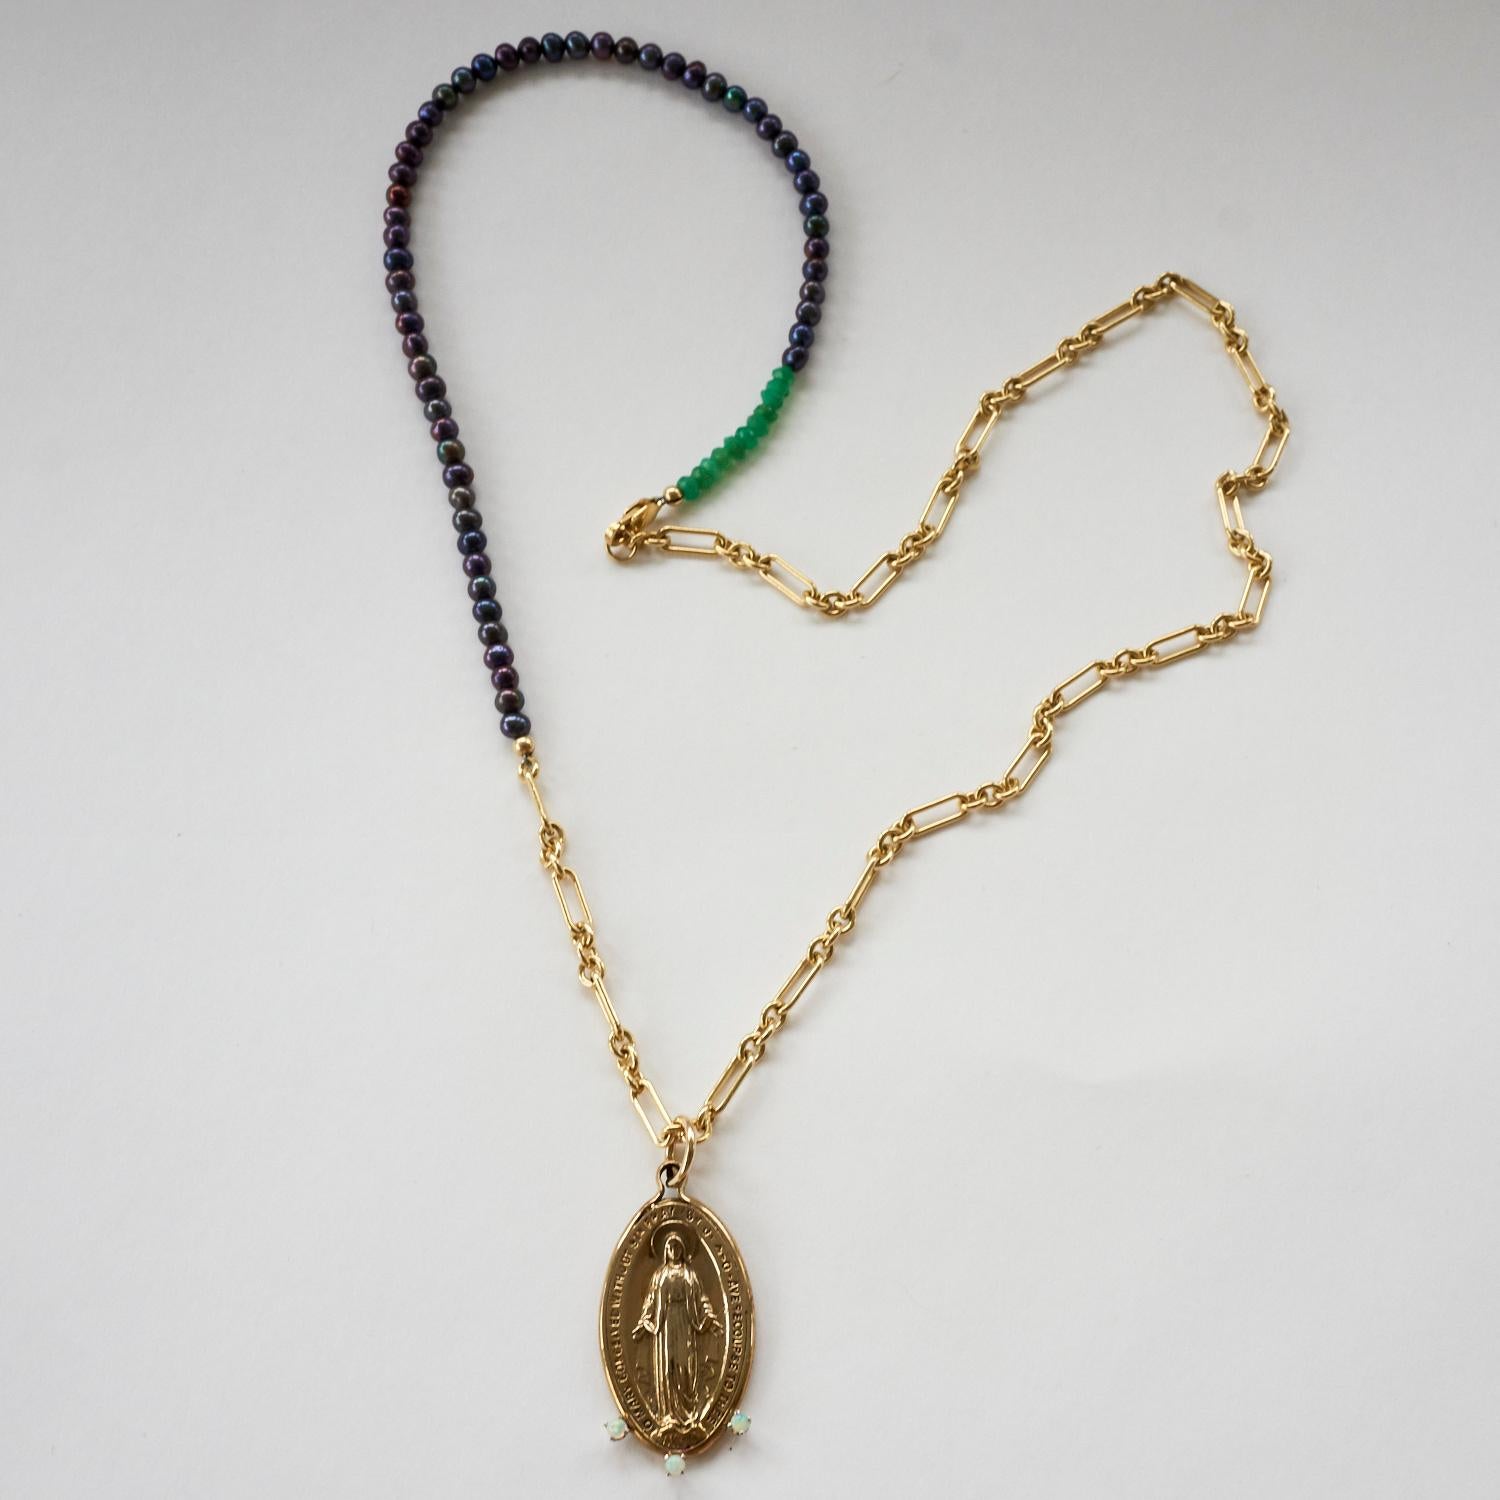 Brilliant Cut Gold-Filled Virgin Mary Opal Prong Set Necklace Black Pearl Bead For Sale